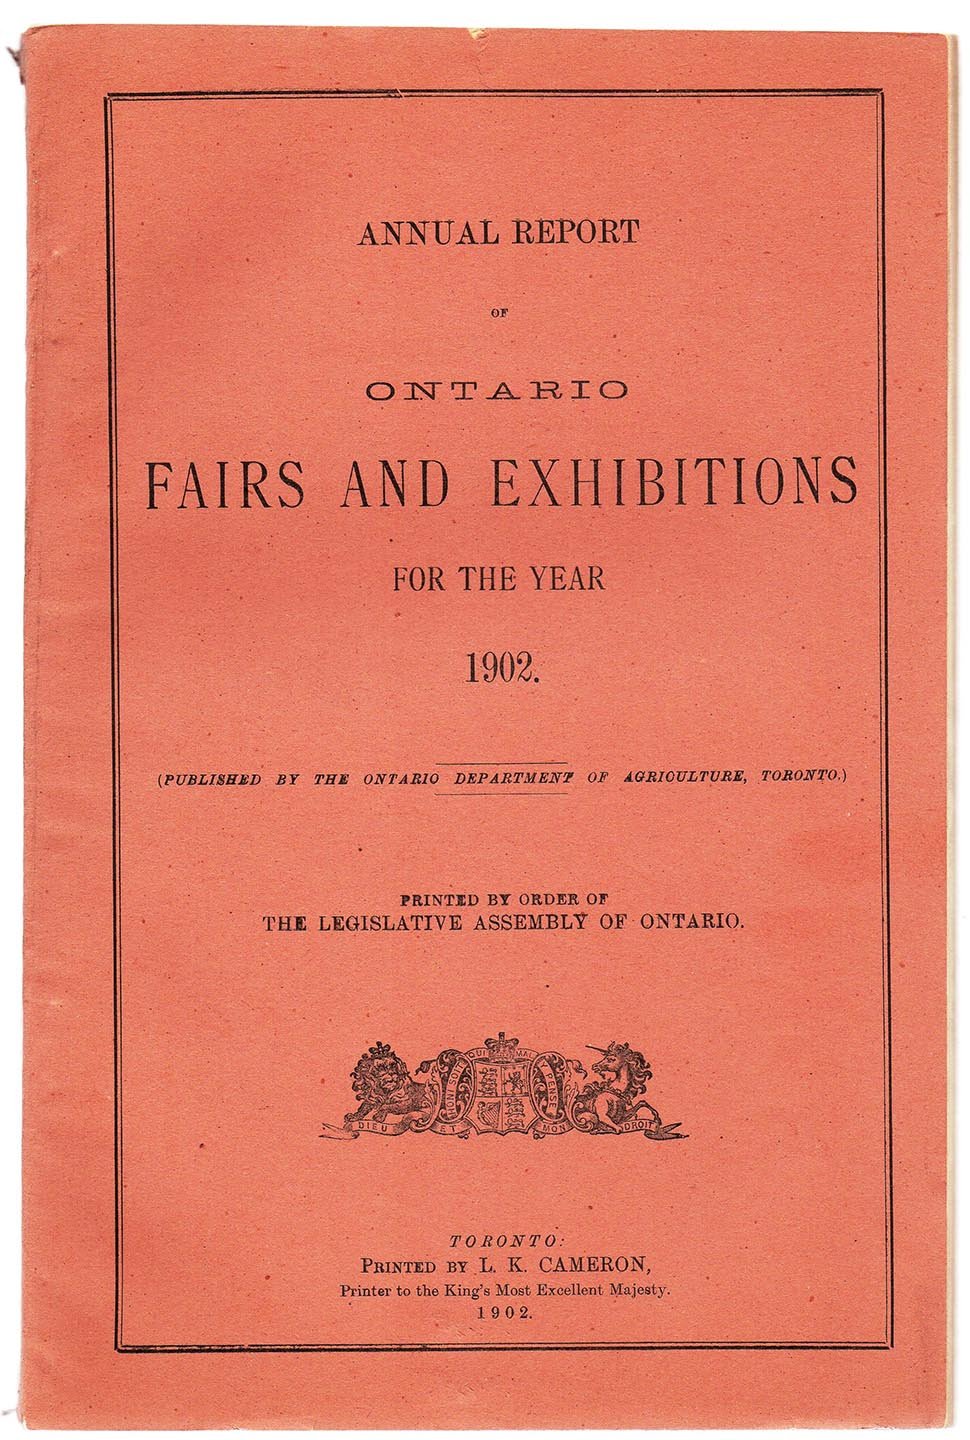 Annual Report of Ontario Fairs and Exhibitions for the Year 1902